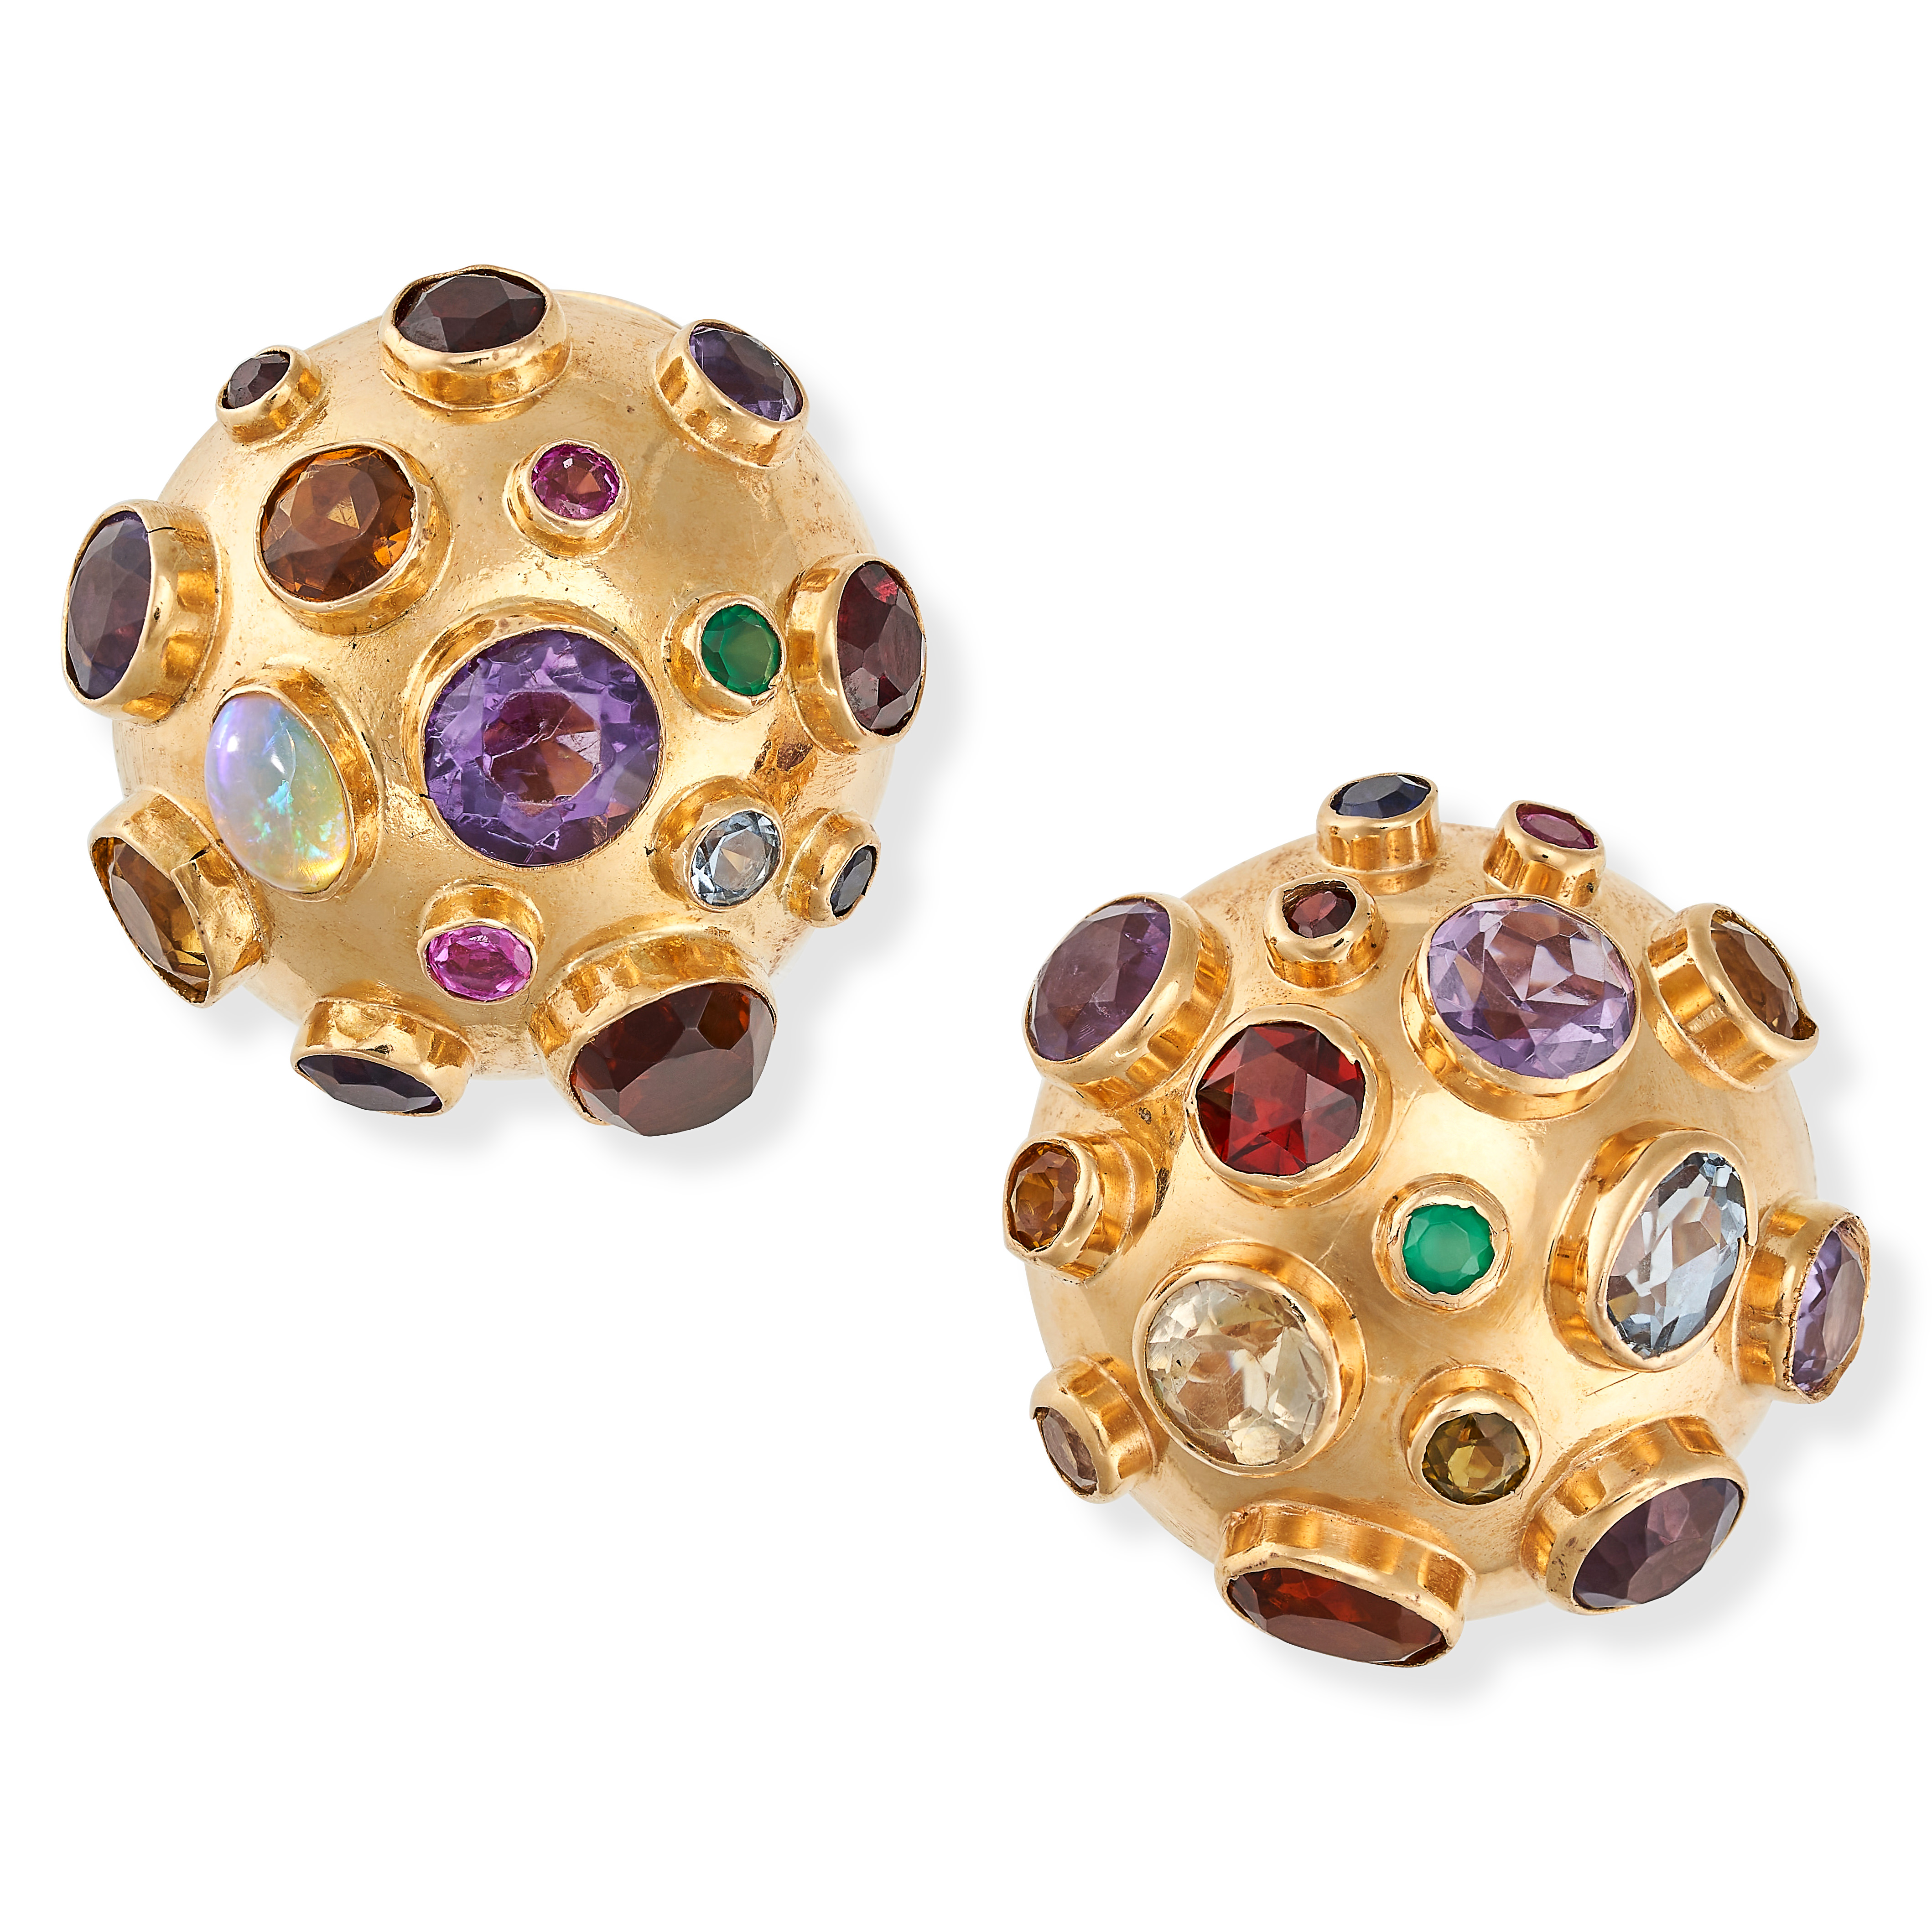 A PAIR OF GEMSET SPUTNIK CLIP EARRINGS in 18ct yellow gold, the domed bodies set with round cut